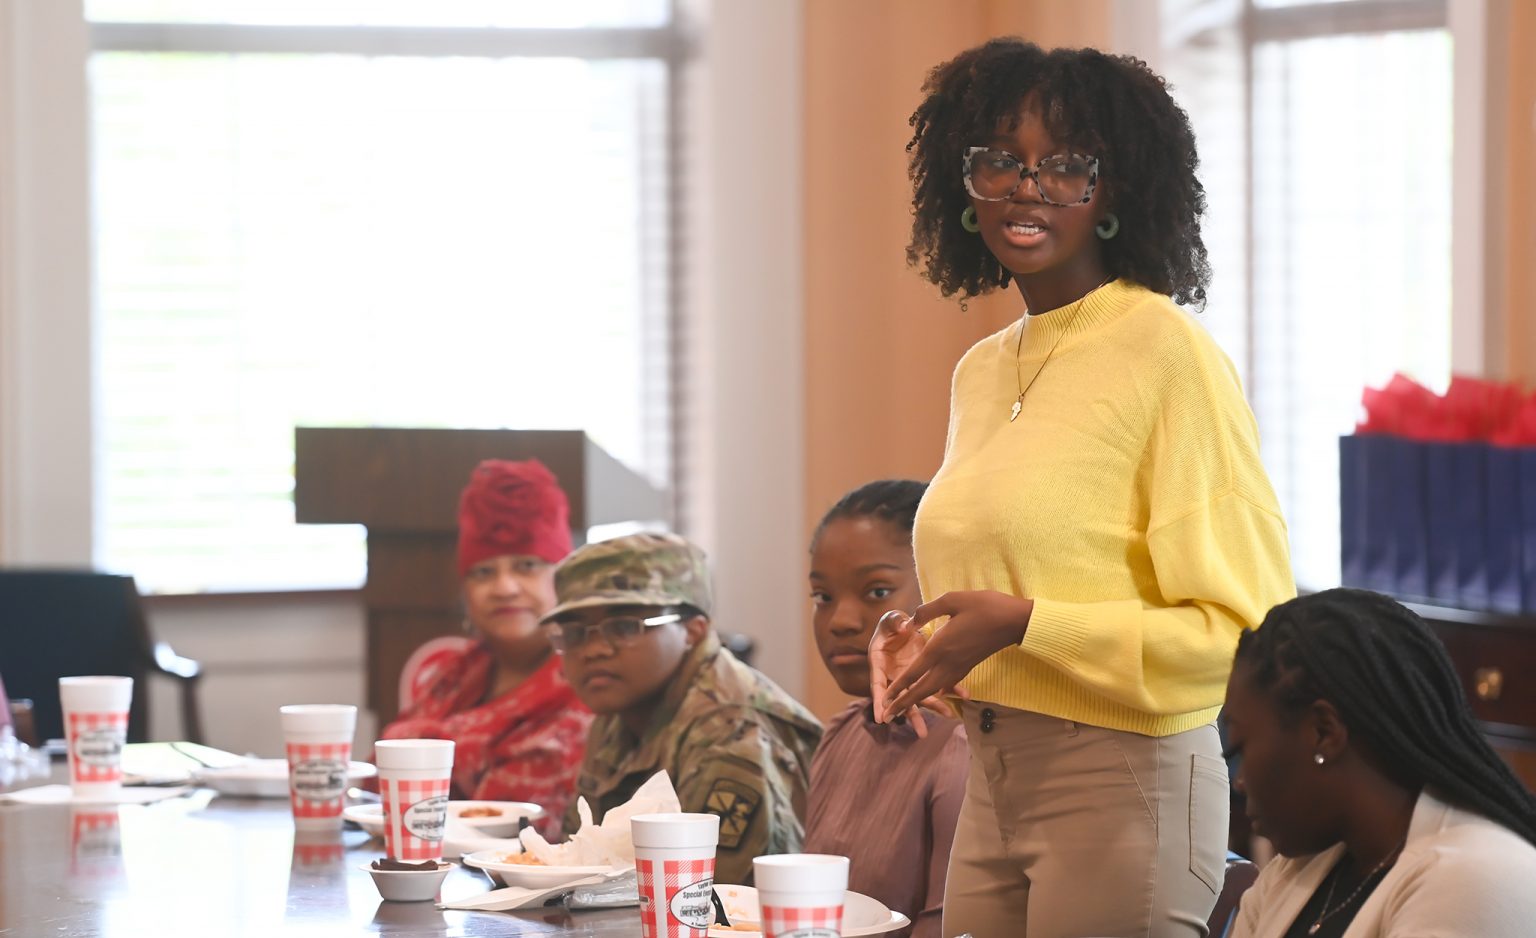 Fatimah Wansley, a sophomore international studies major from Jackson, introduces herself during a luncheon for recipients of the Ole Miss 8 scholarship. Wansley is among the inaugural recipients of the new award. Photo by Kevin Bain/Ole Miss Digital Imaging Services